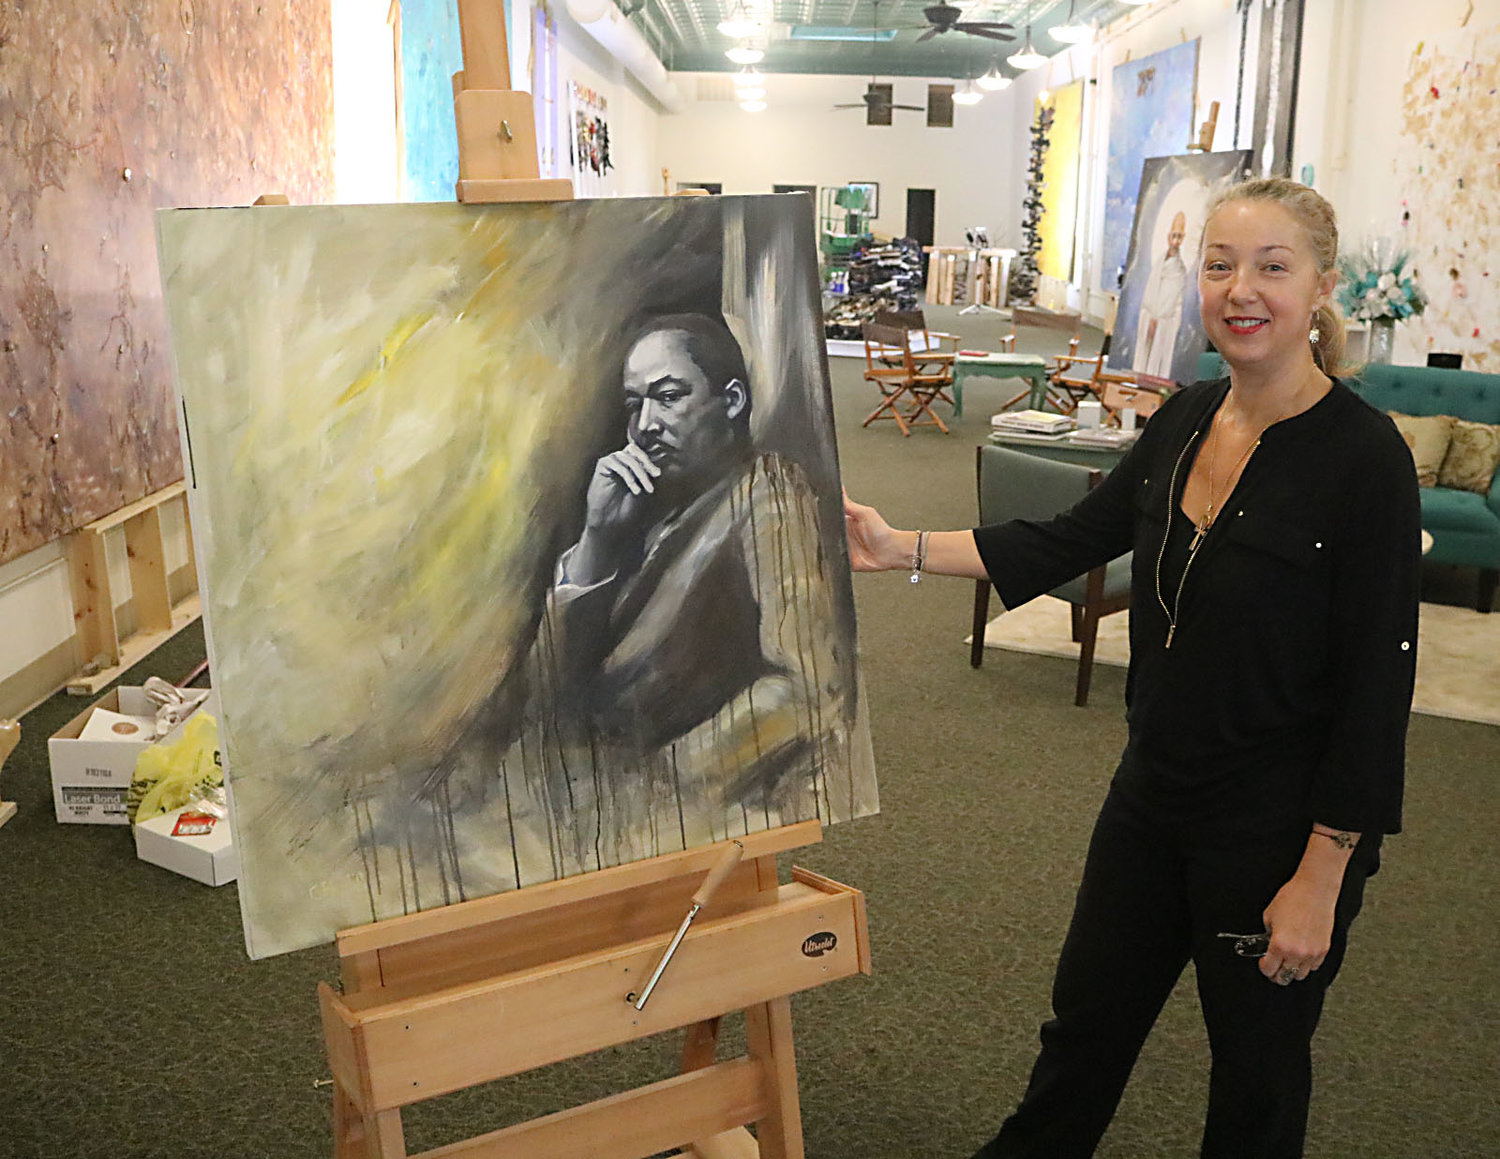 Cecile Houel will be showcasing her Nobel Peace Prize Project and "God's Feet" art series at a public event on Saturday from 5 p.m. to 8 p.m. Photo by Chuck Vandenberg/PCC.